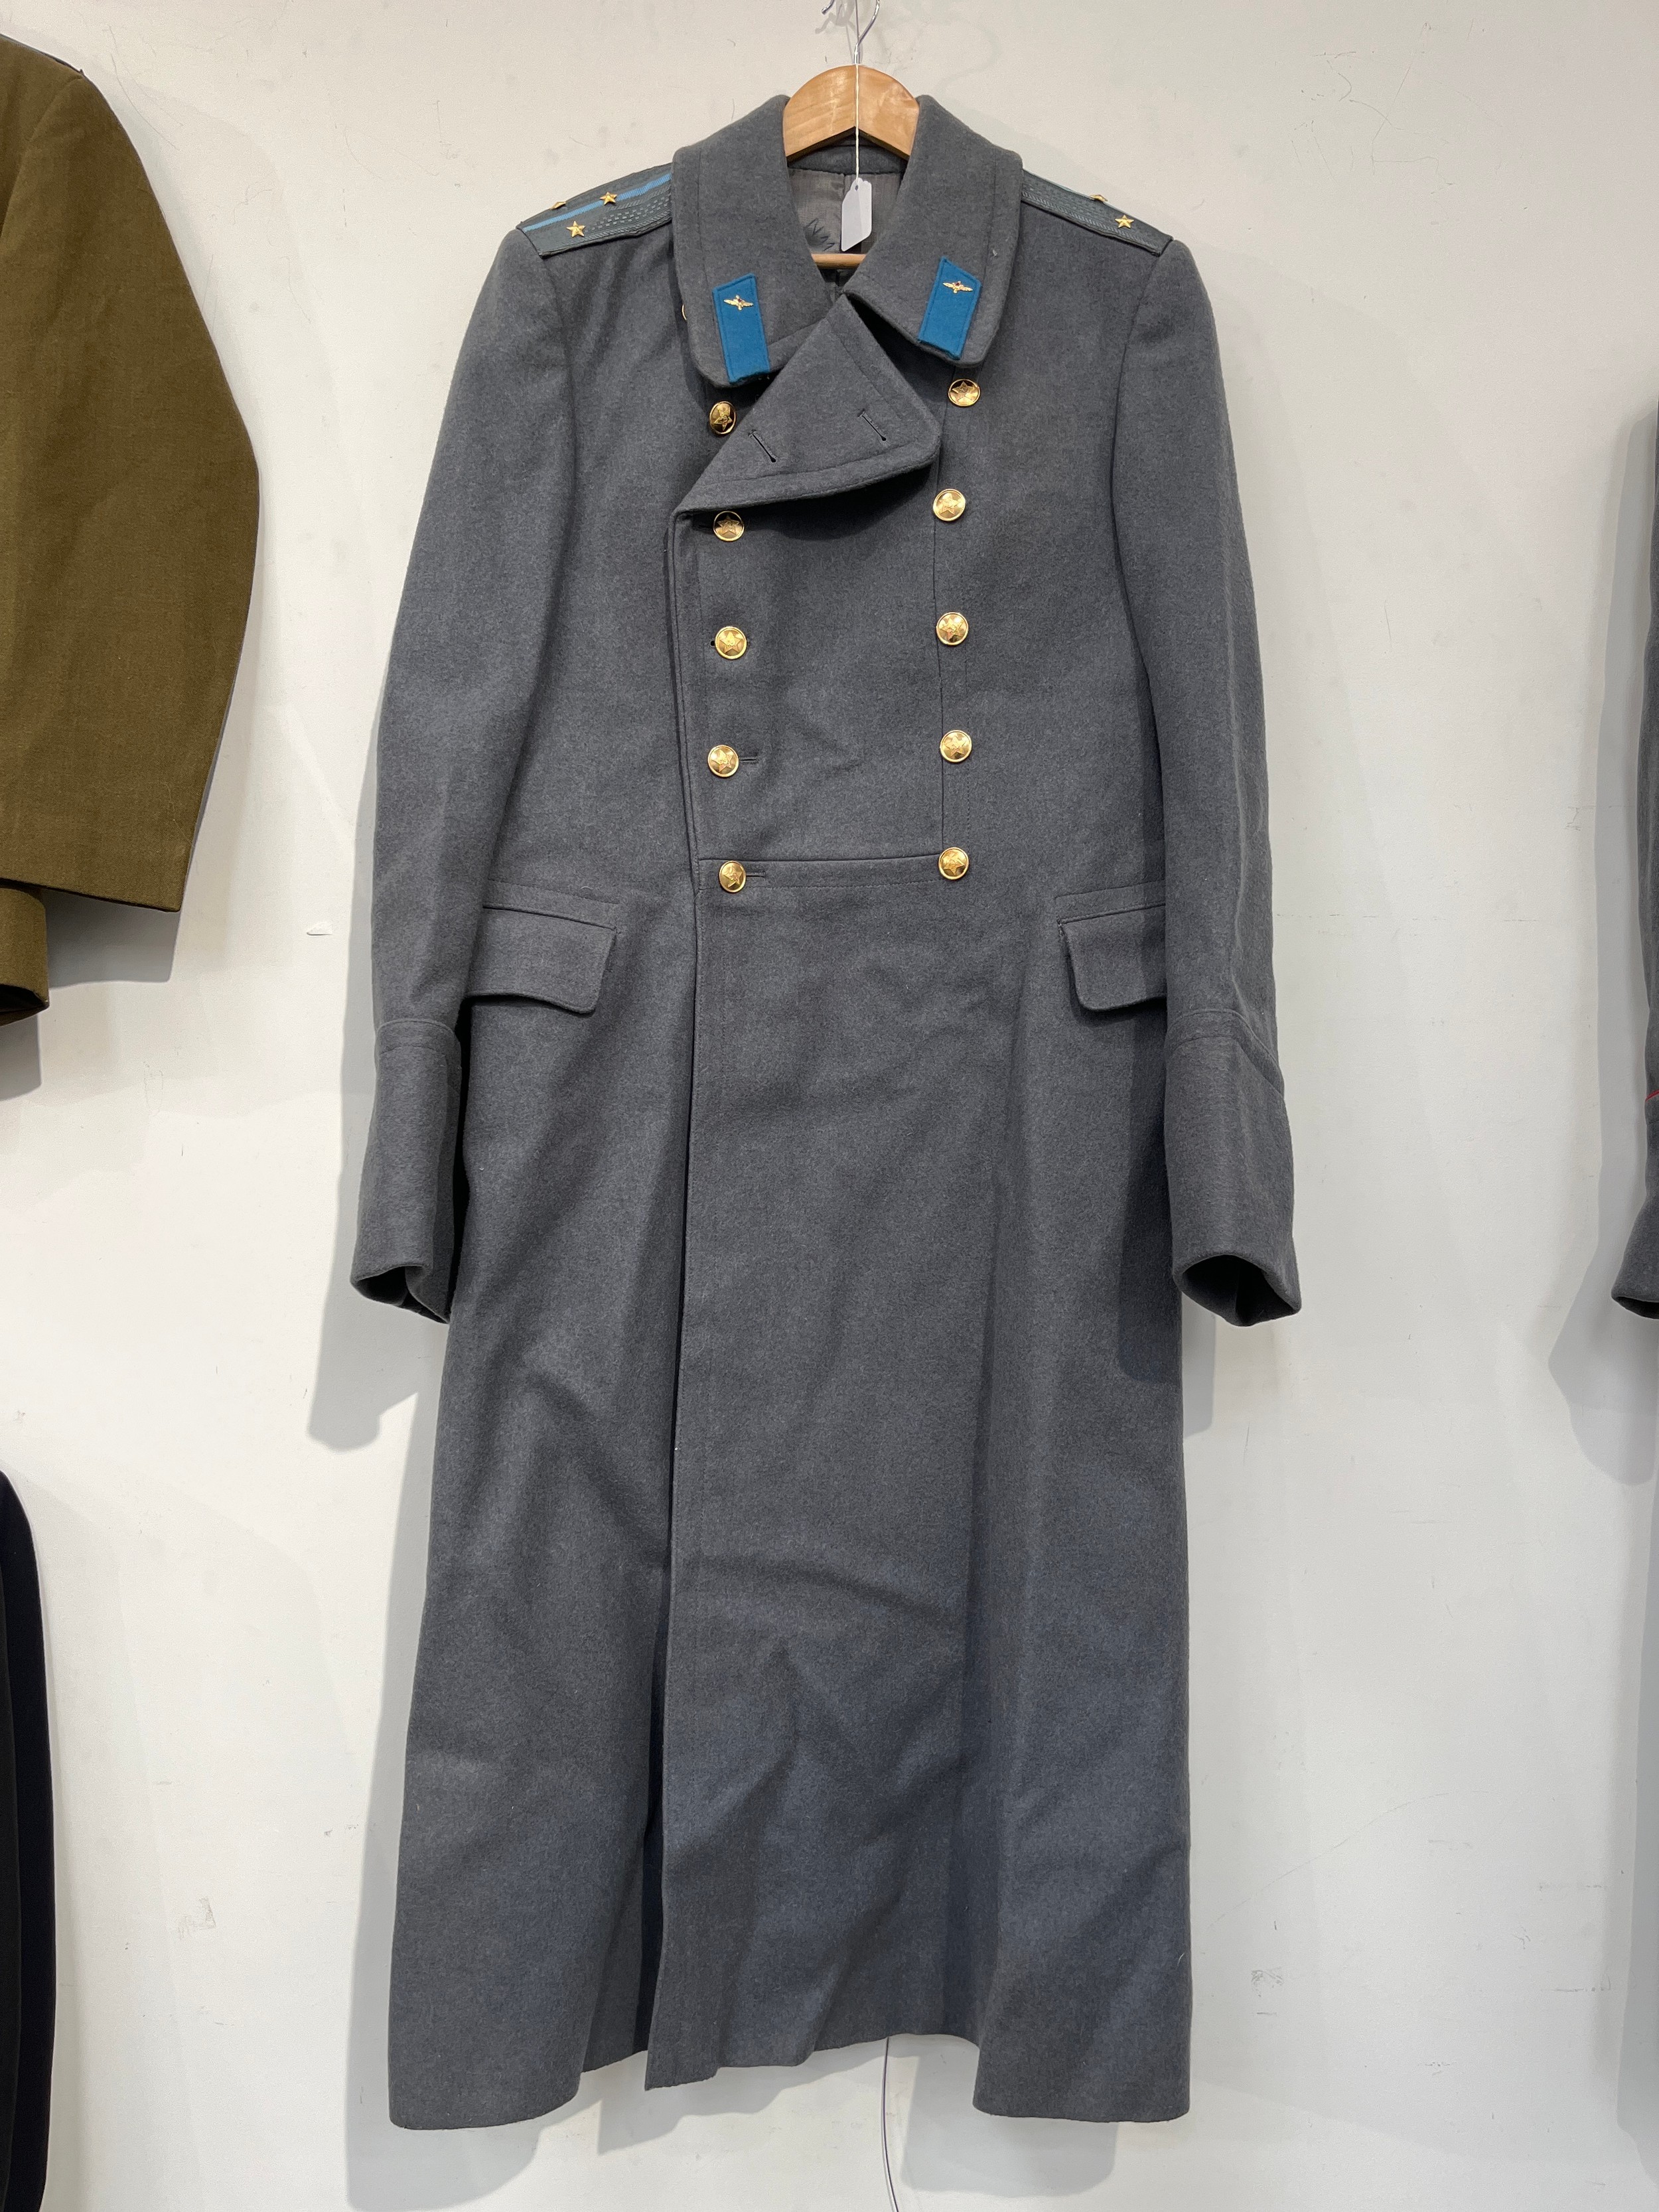 A USSR Russian Soviet Air Force officer's overcoat, three star pips to shoulders